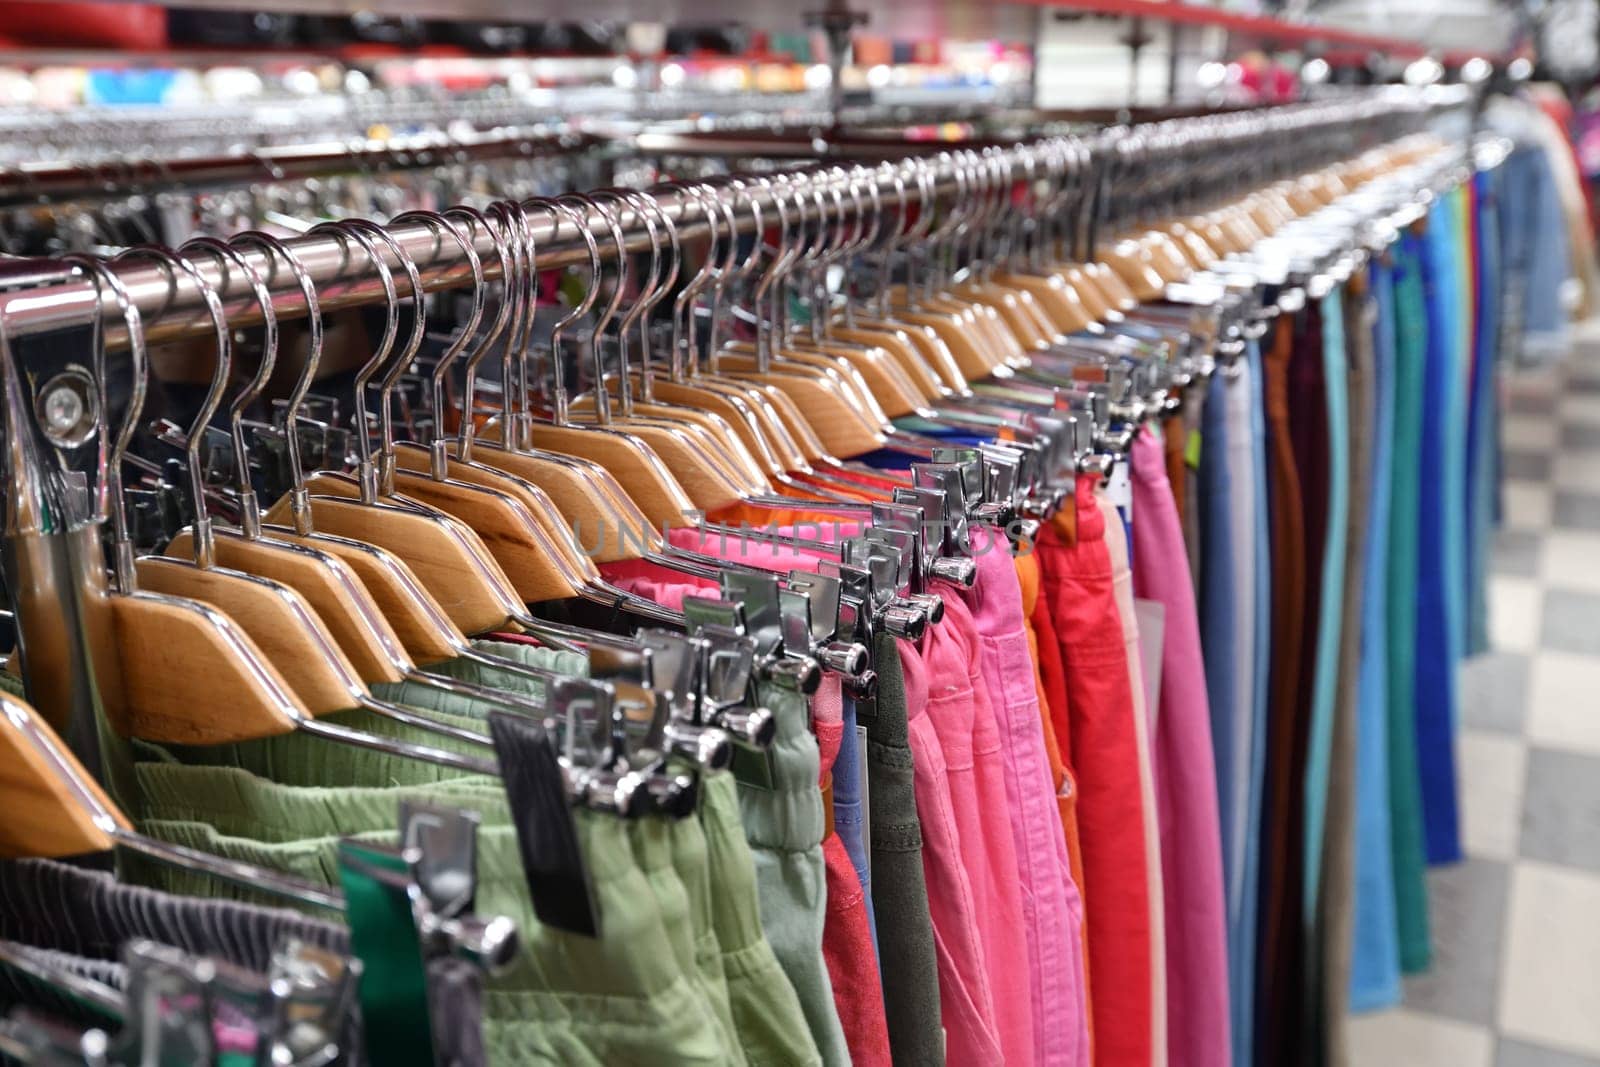 Women's trousers hang in row in a store